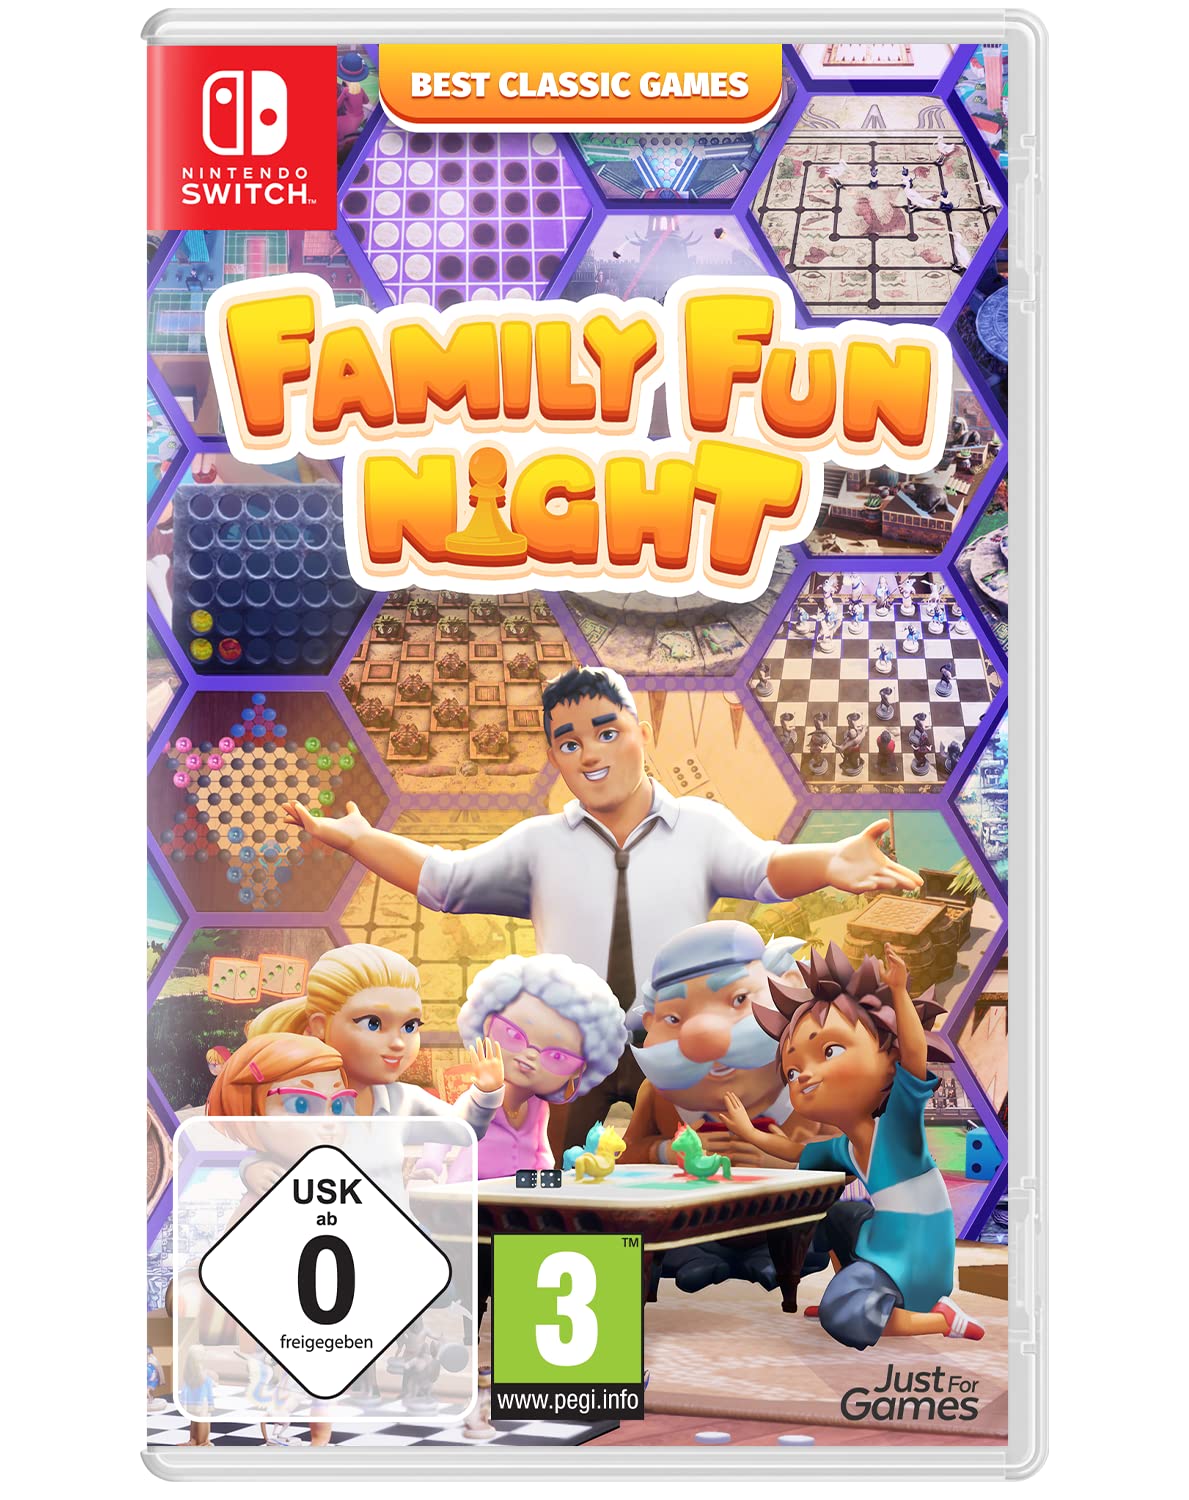 That's My Family - Family Fun Night [Switch]